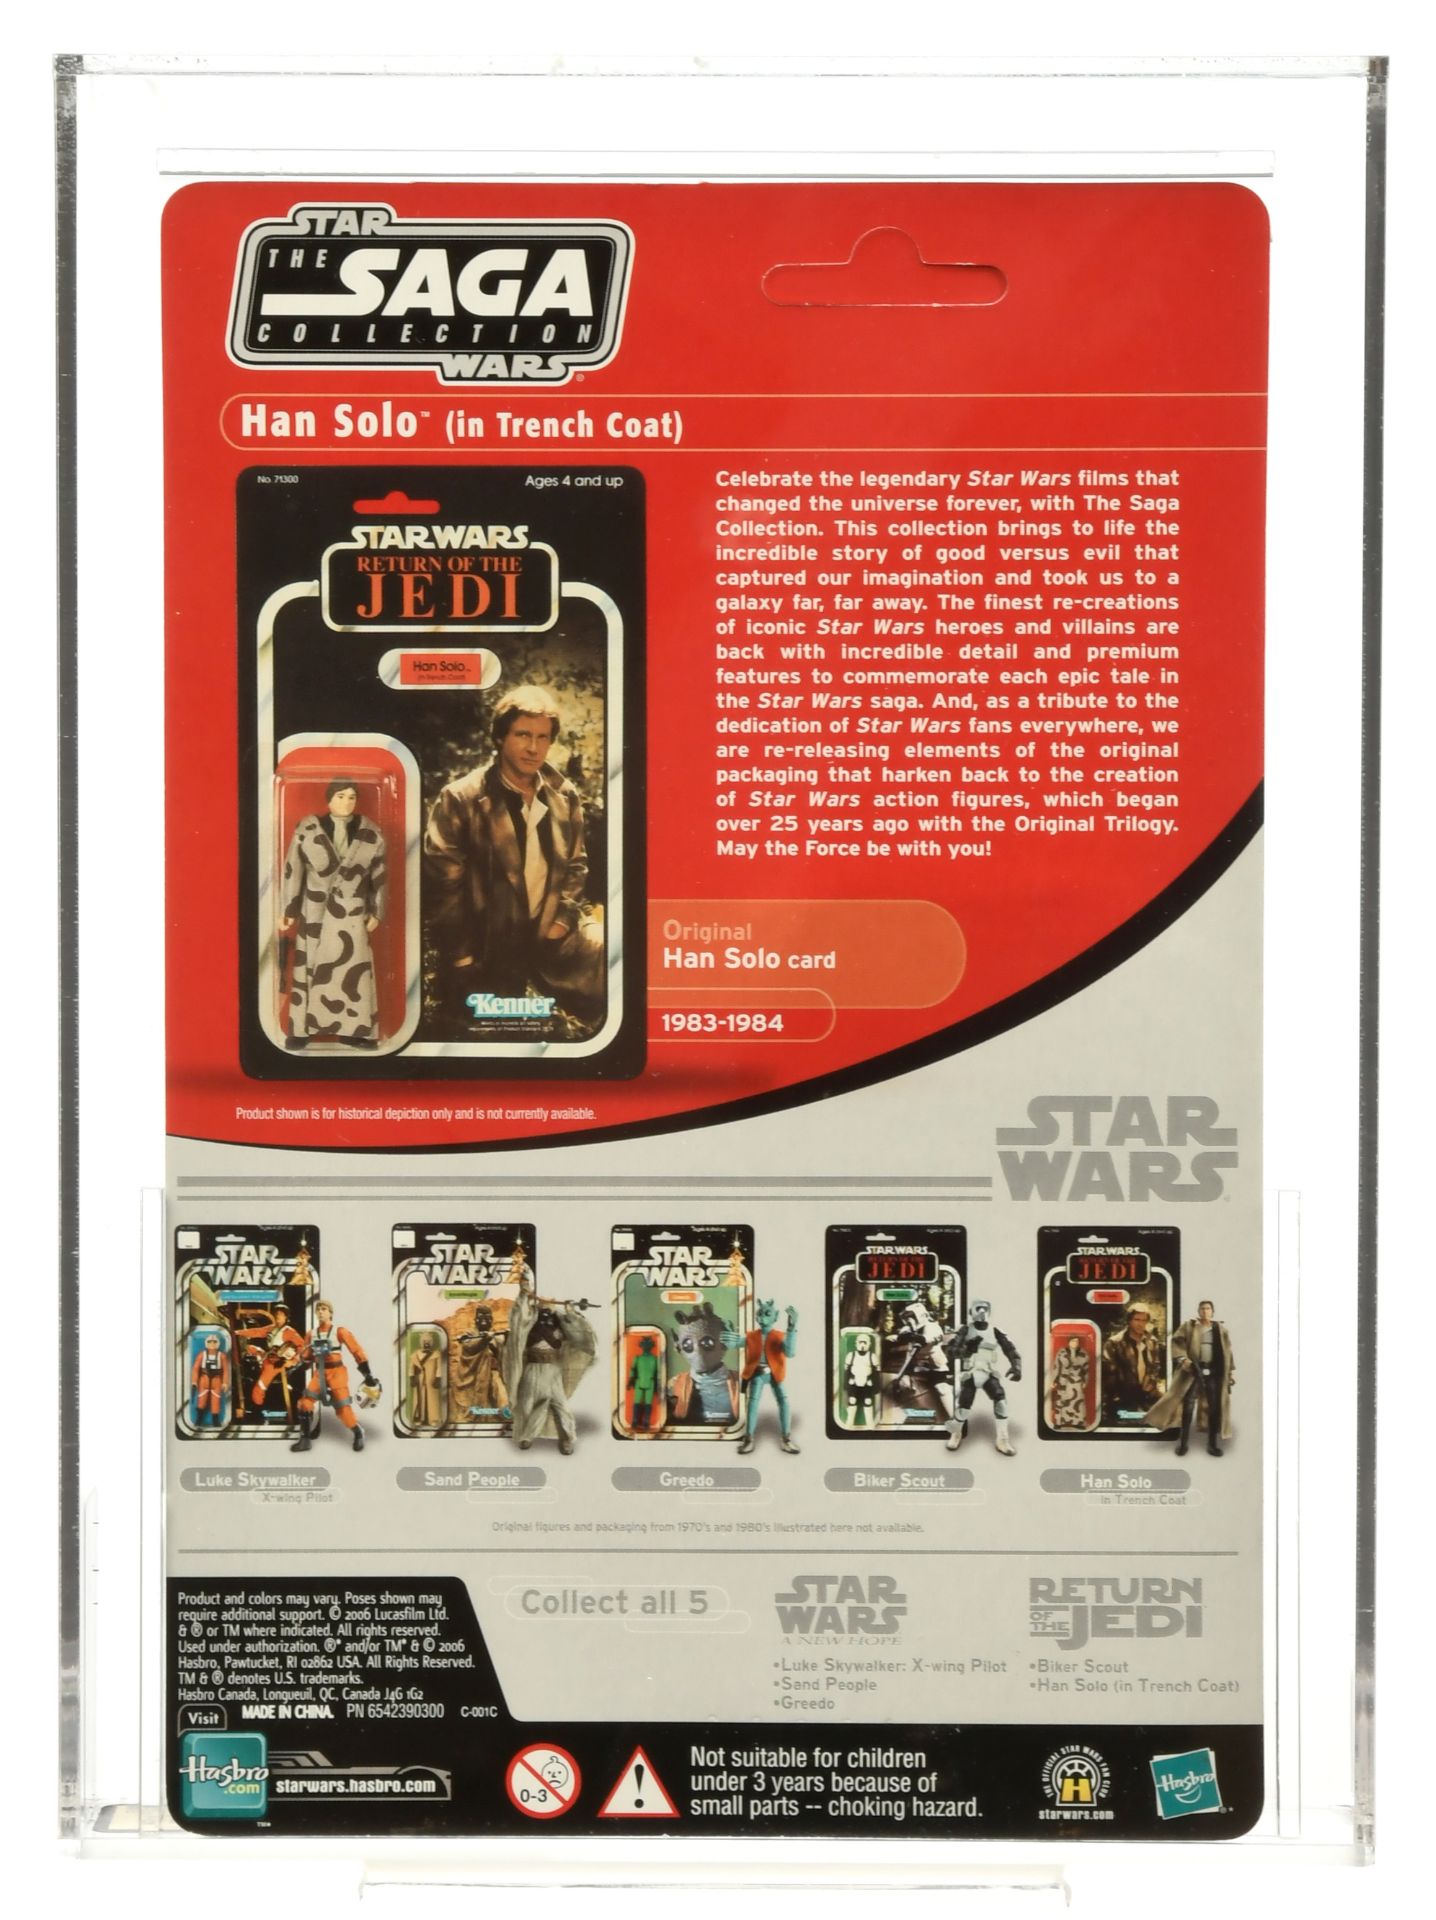 Hasbro Star Wars The Saga Collection Han Solo (In Trench Coat) AFA Graded 3 3/4 Action Figure - Image 2 of 5